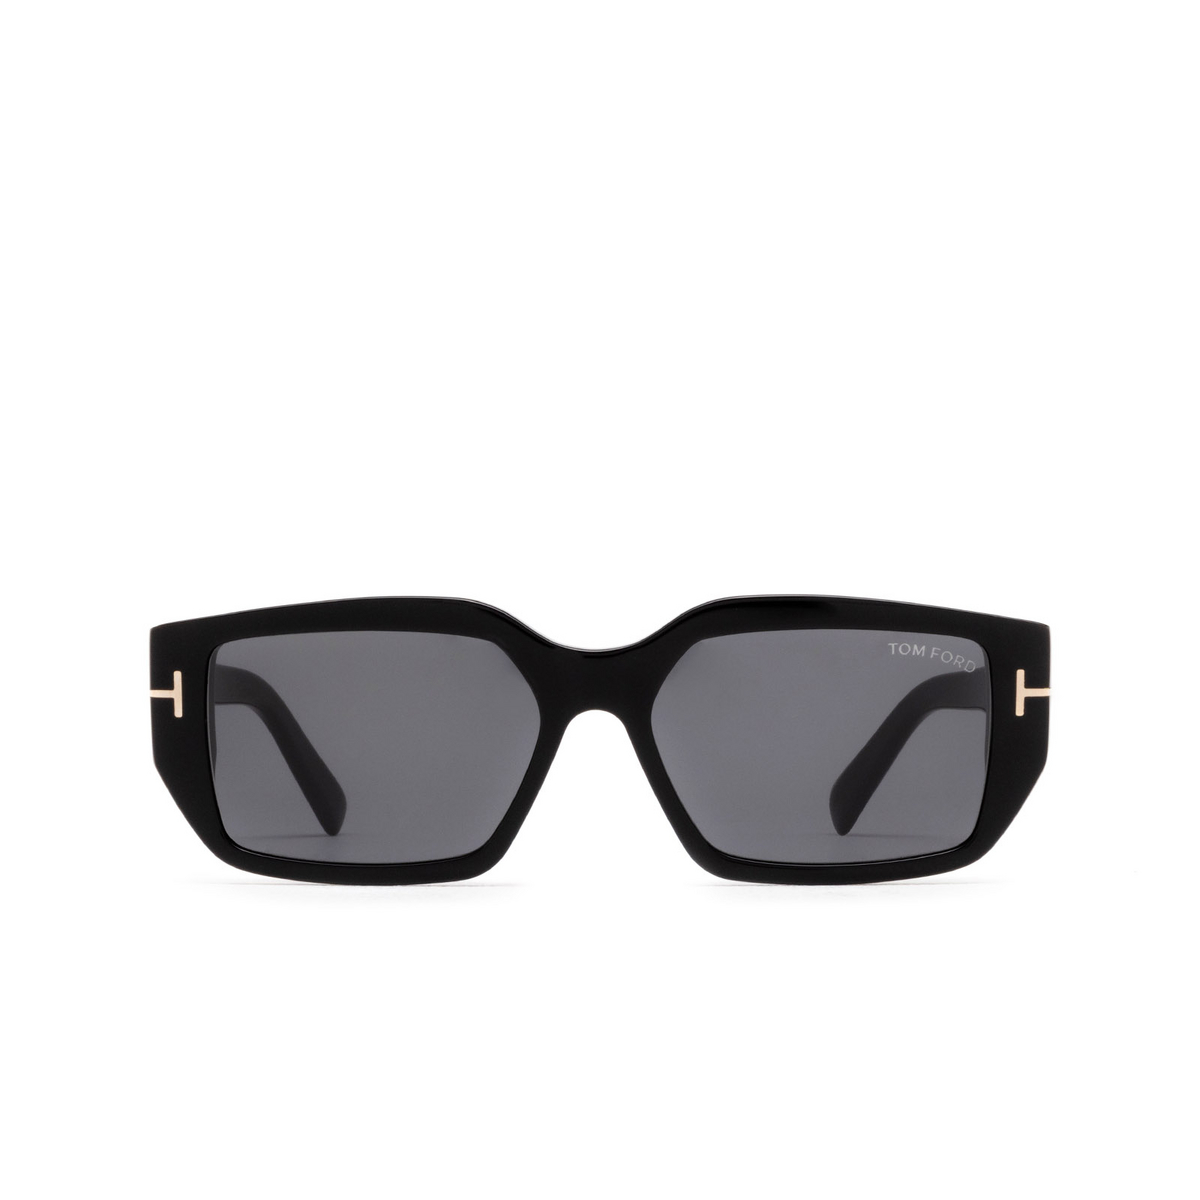 Tom Ford SILVANO-02 Sunglasses 01A Black - front view